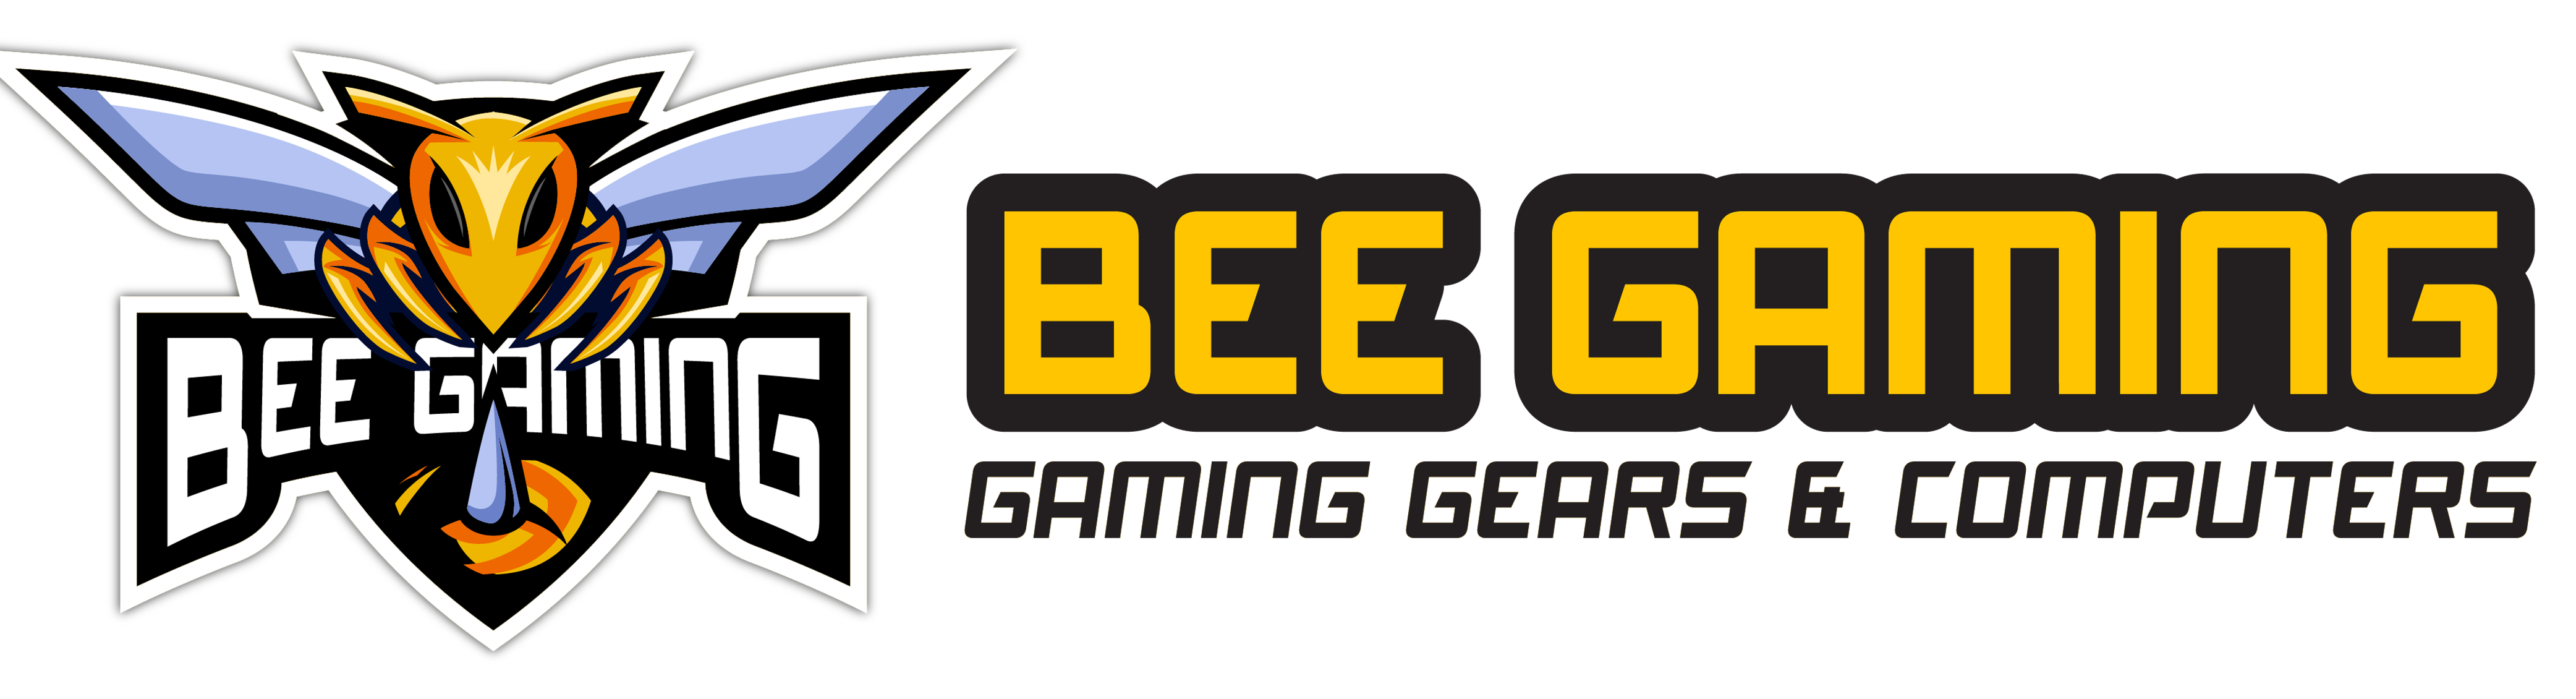 Bee Gaming Gear's Computer